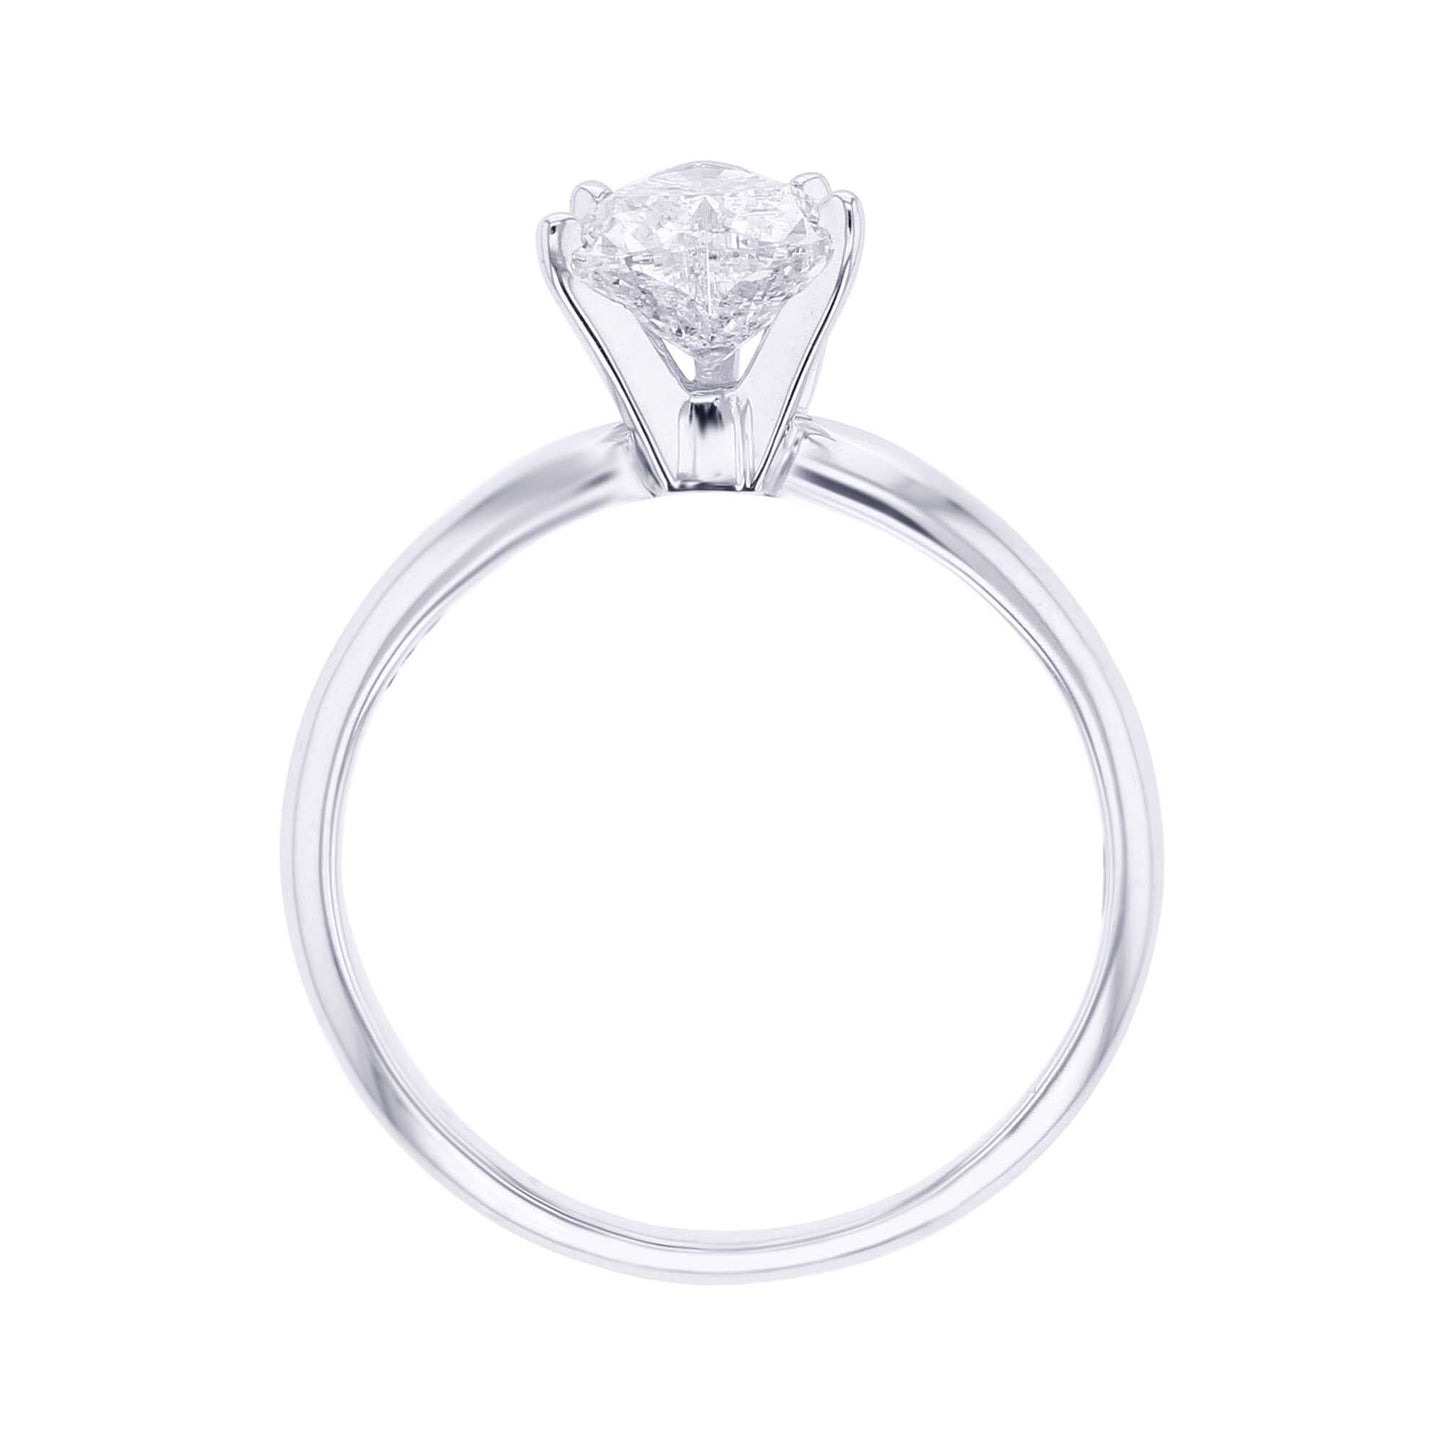 Christa Heart Ready for Love Engagement Ring 1ct